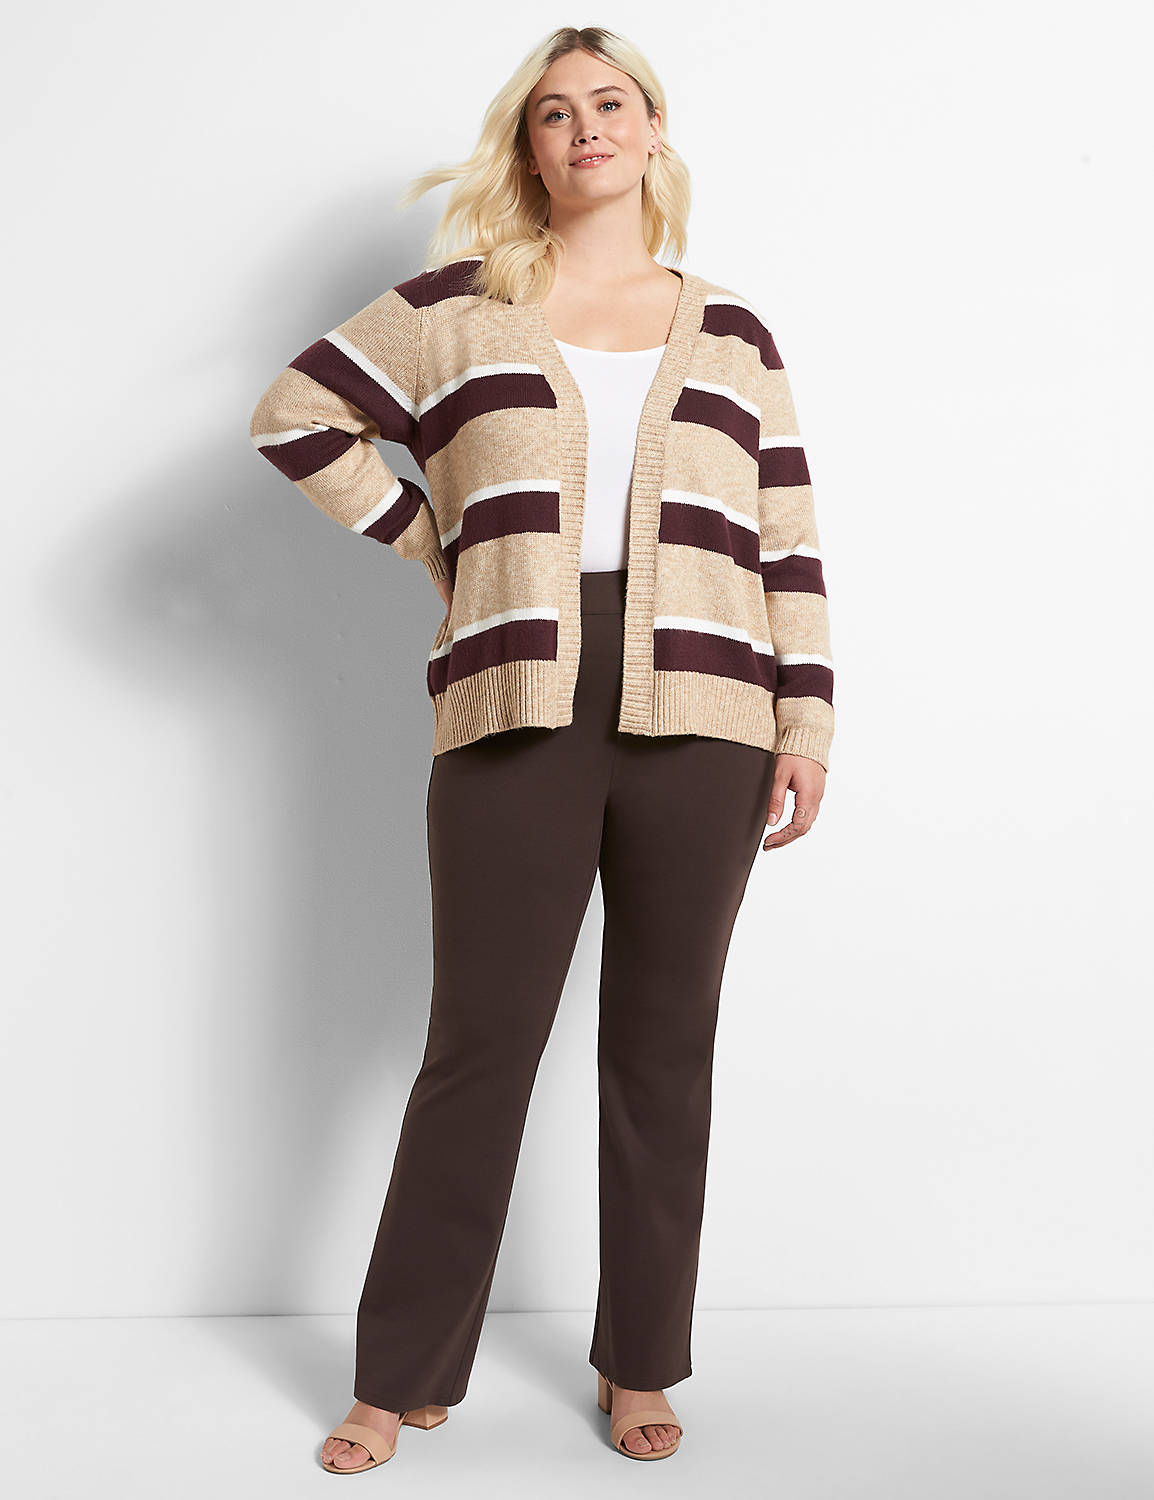 Long Sleeve Open Front Striped Cardigan 1122359:Camel Heather B0221:10/12 Product Image 3